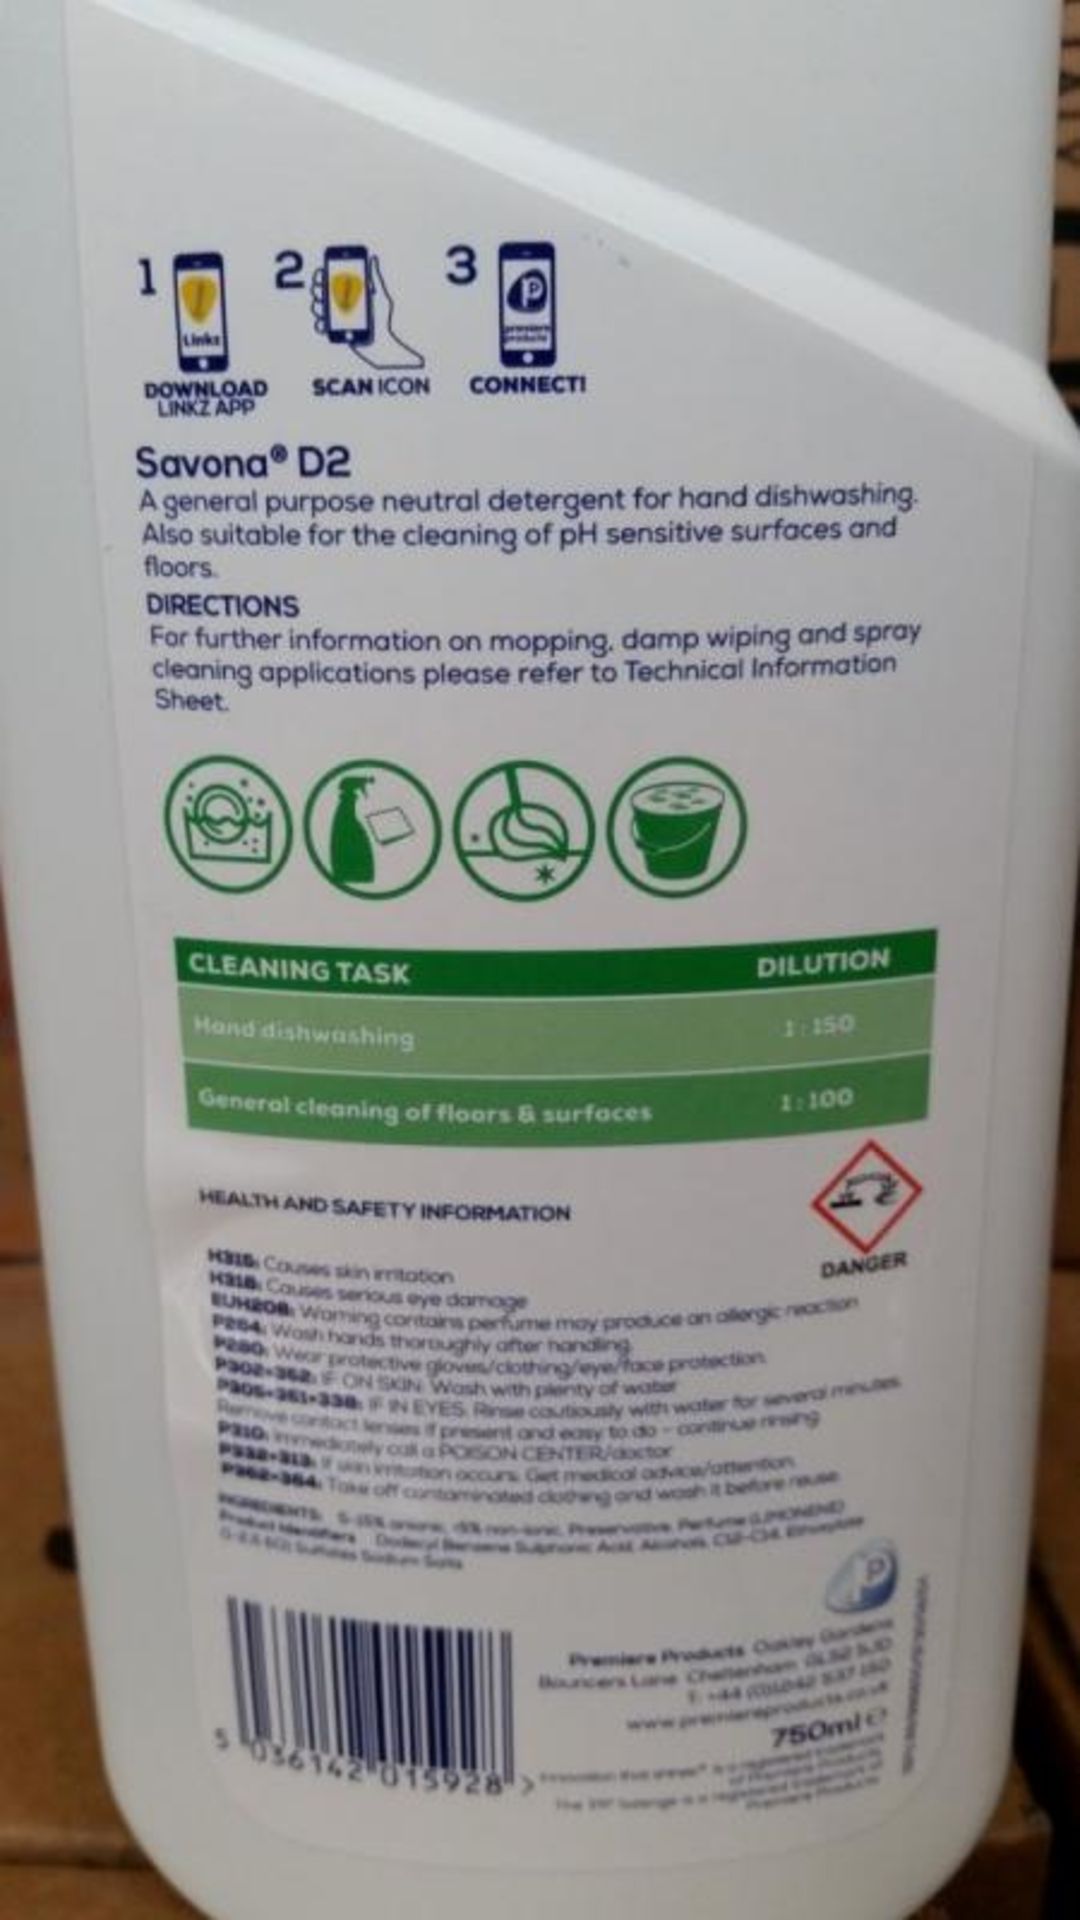 12 x Premiere Products 750ml Savona D2 Washing Up Liquid - For Squeaky Clean Crockery, Cutlery, Pots - Image 4 of 6